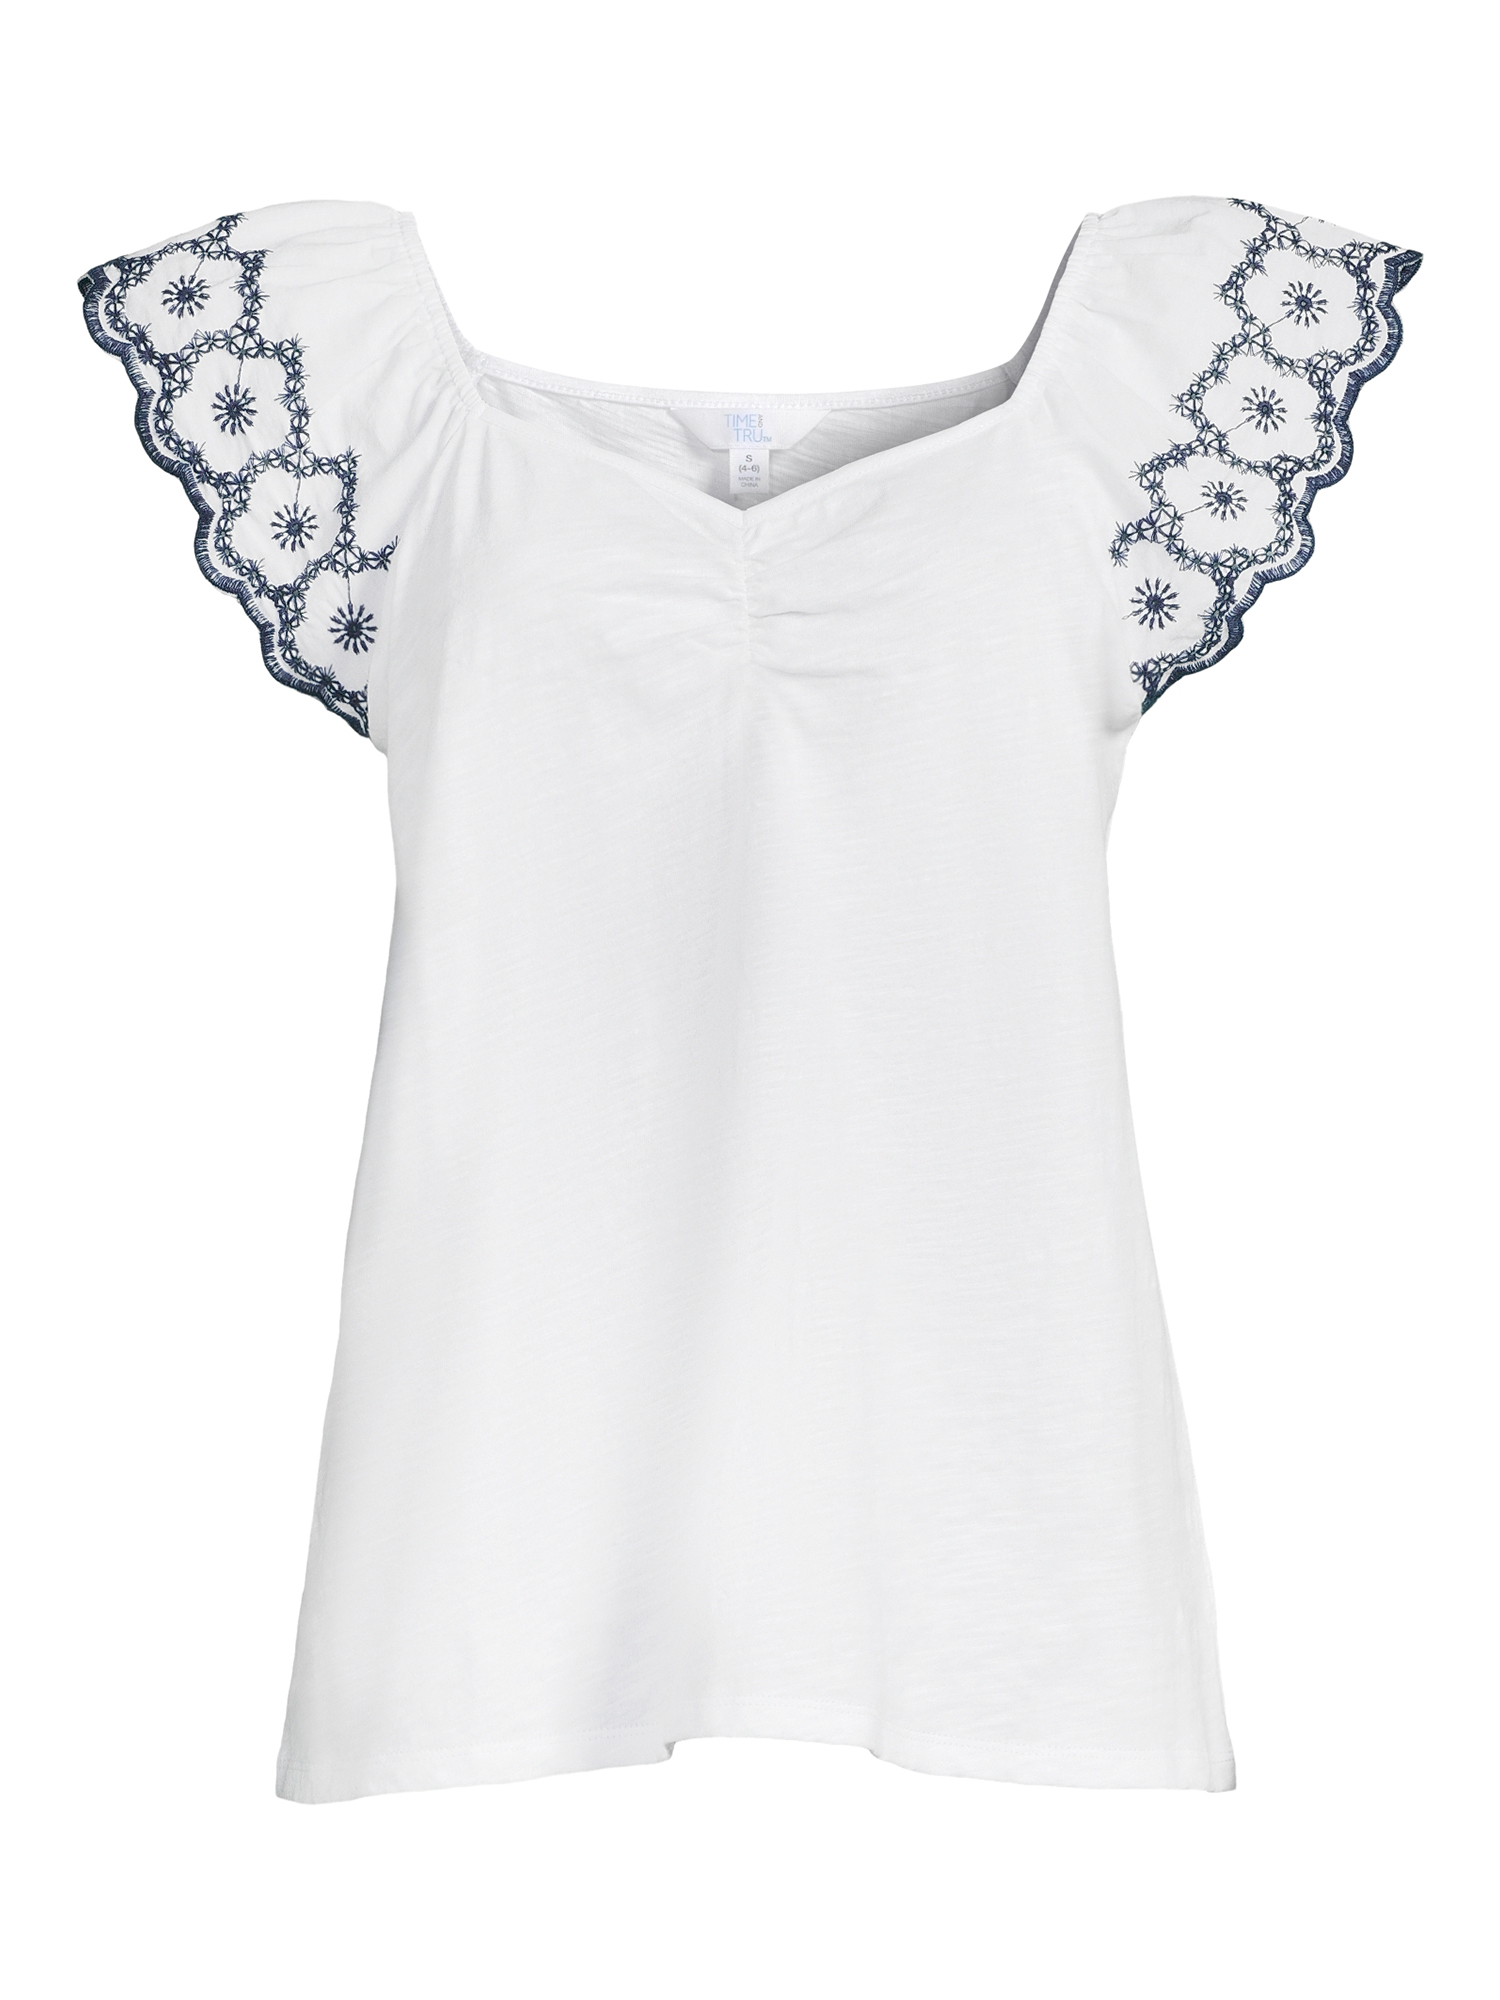 Time and Tru Women's Flutter Sleeve Top - image 5 of 5